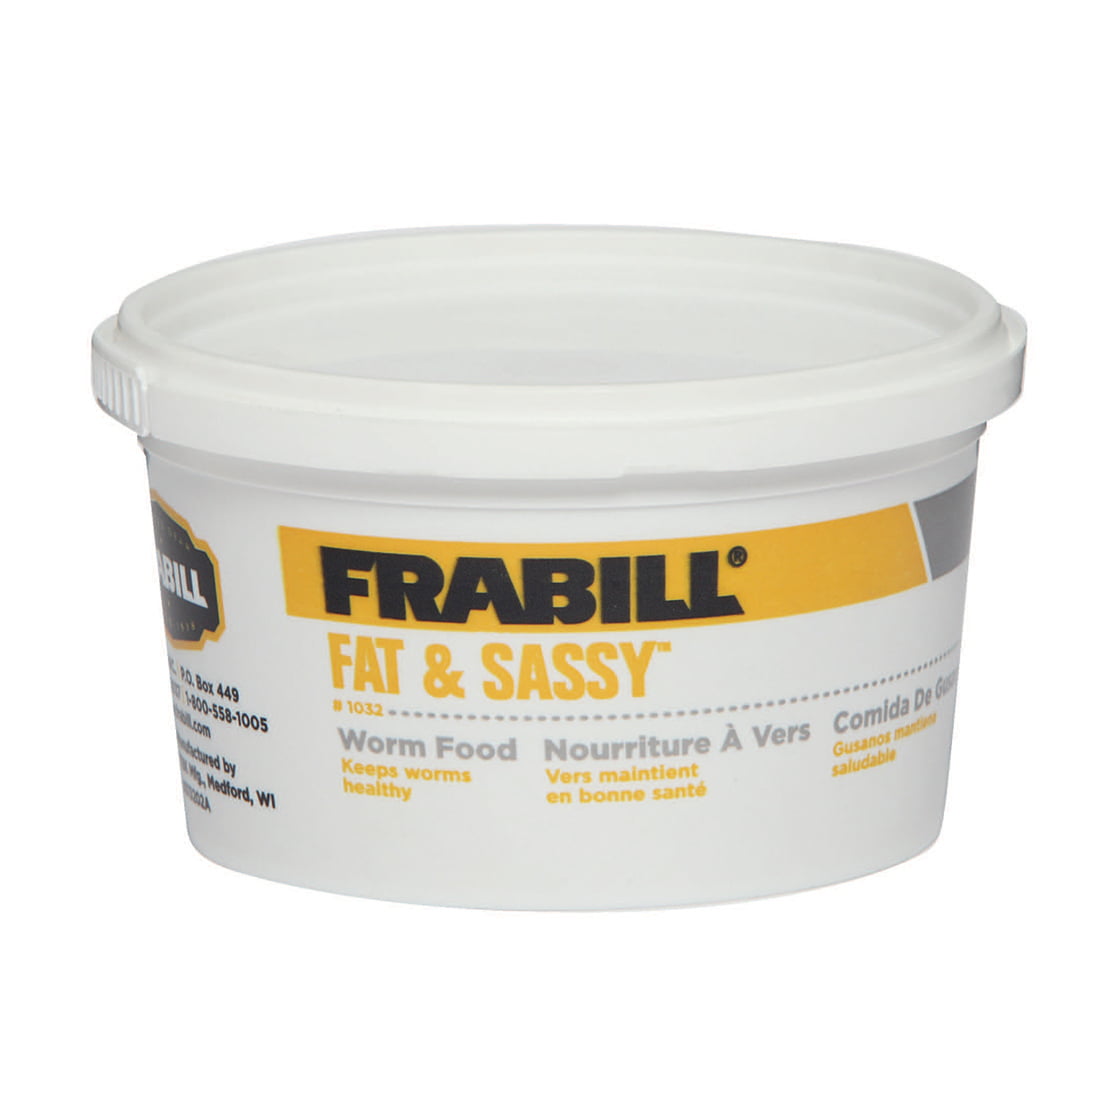 Frabill Fat and Sassy Worm Food 